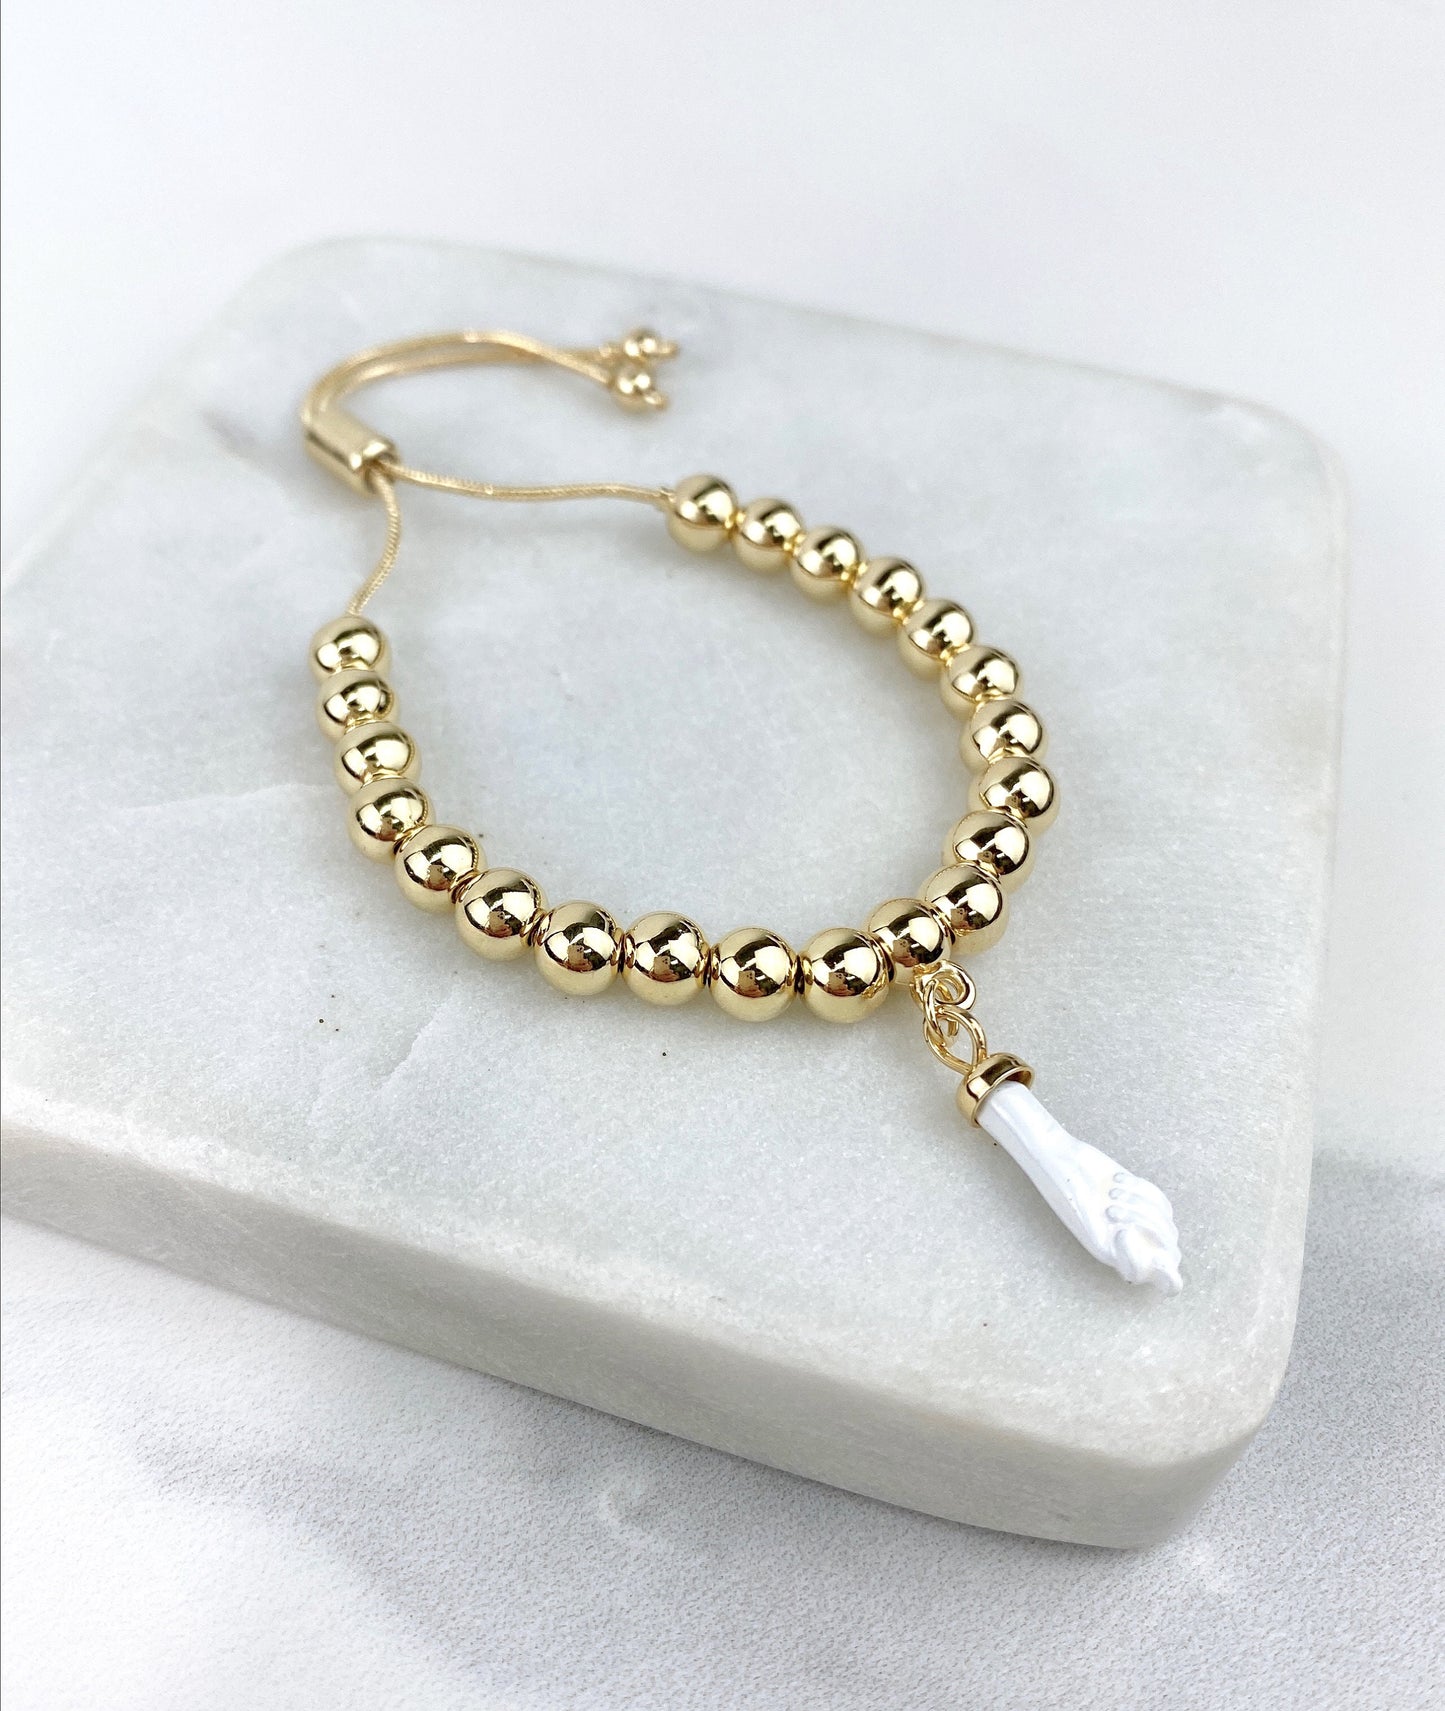 18k Gold Filled Beads, White Figa Hand Charm, Adjustable Bracelet, Protection Jewelry WholesaleJewelry Supplies